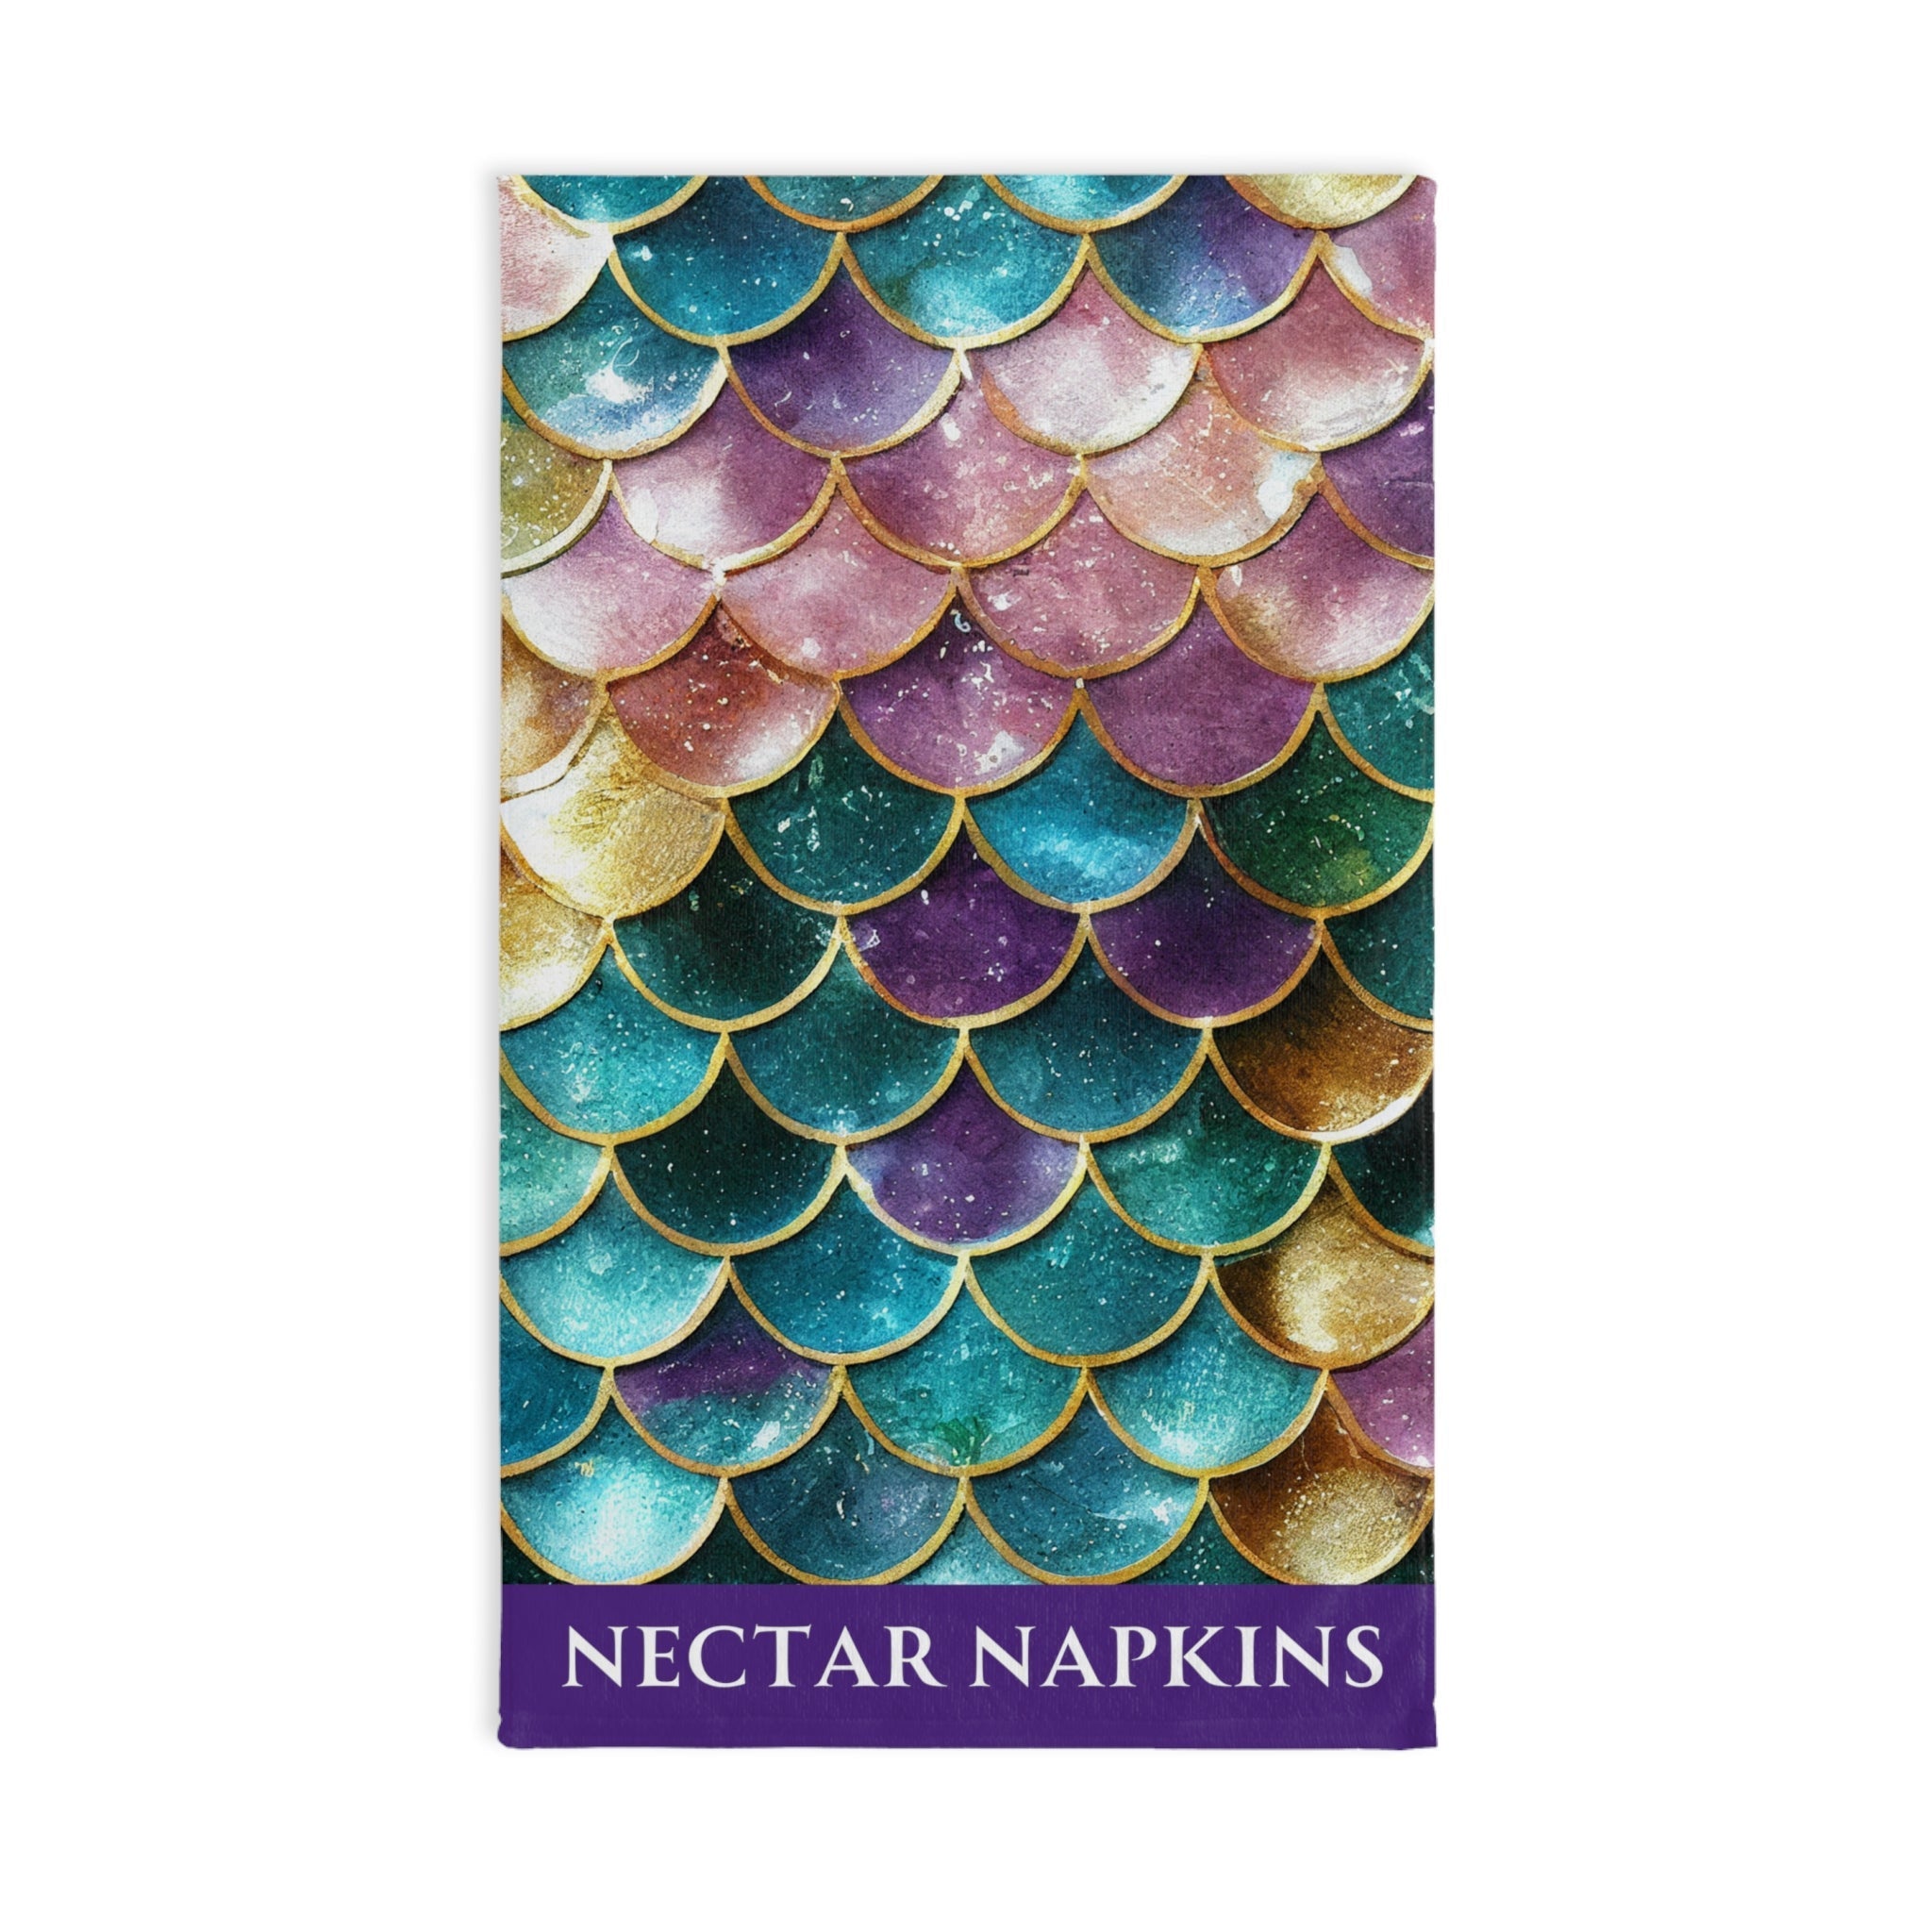 Mermaid Gold Sparkle Purple | Funny Gifts for Men - Gifts for Him - Birthday Gifts for Men, Him, Husband, Boyfriend, New Couple Gifts, Fathers & Valentines Day Gifts, Christmas Gifts NECTAR NAPKINS